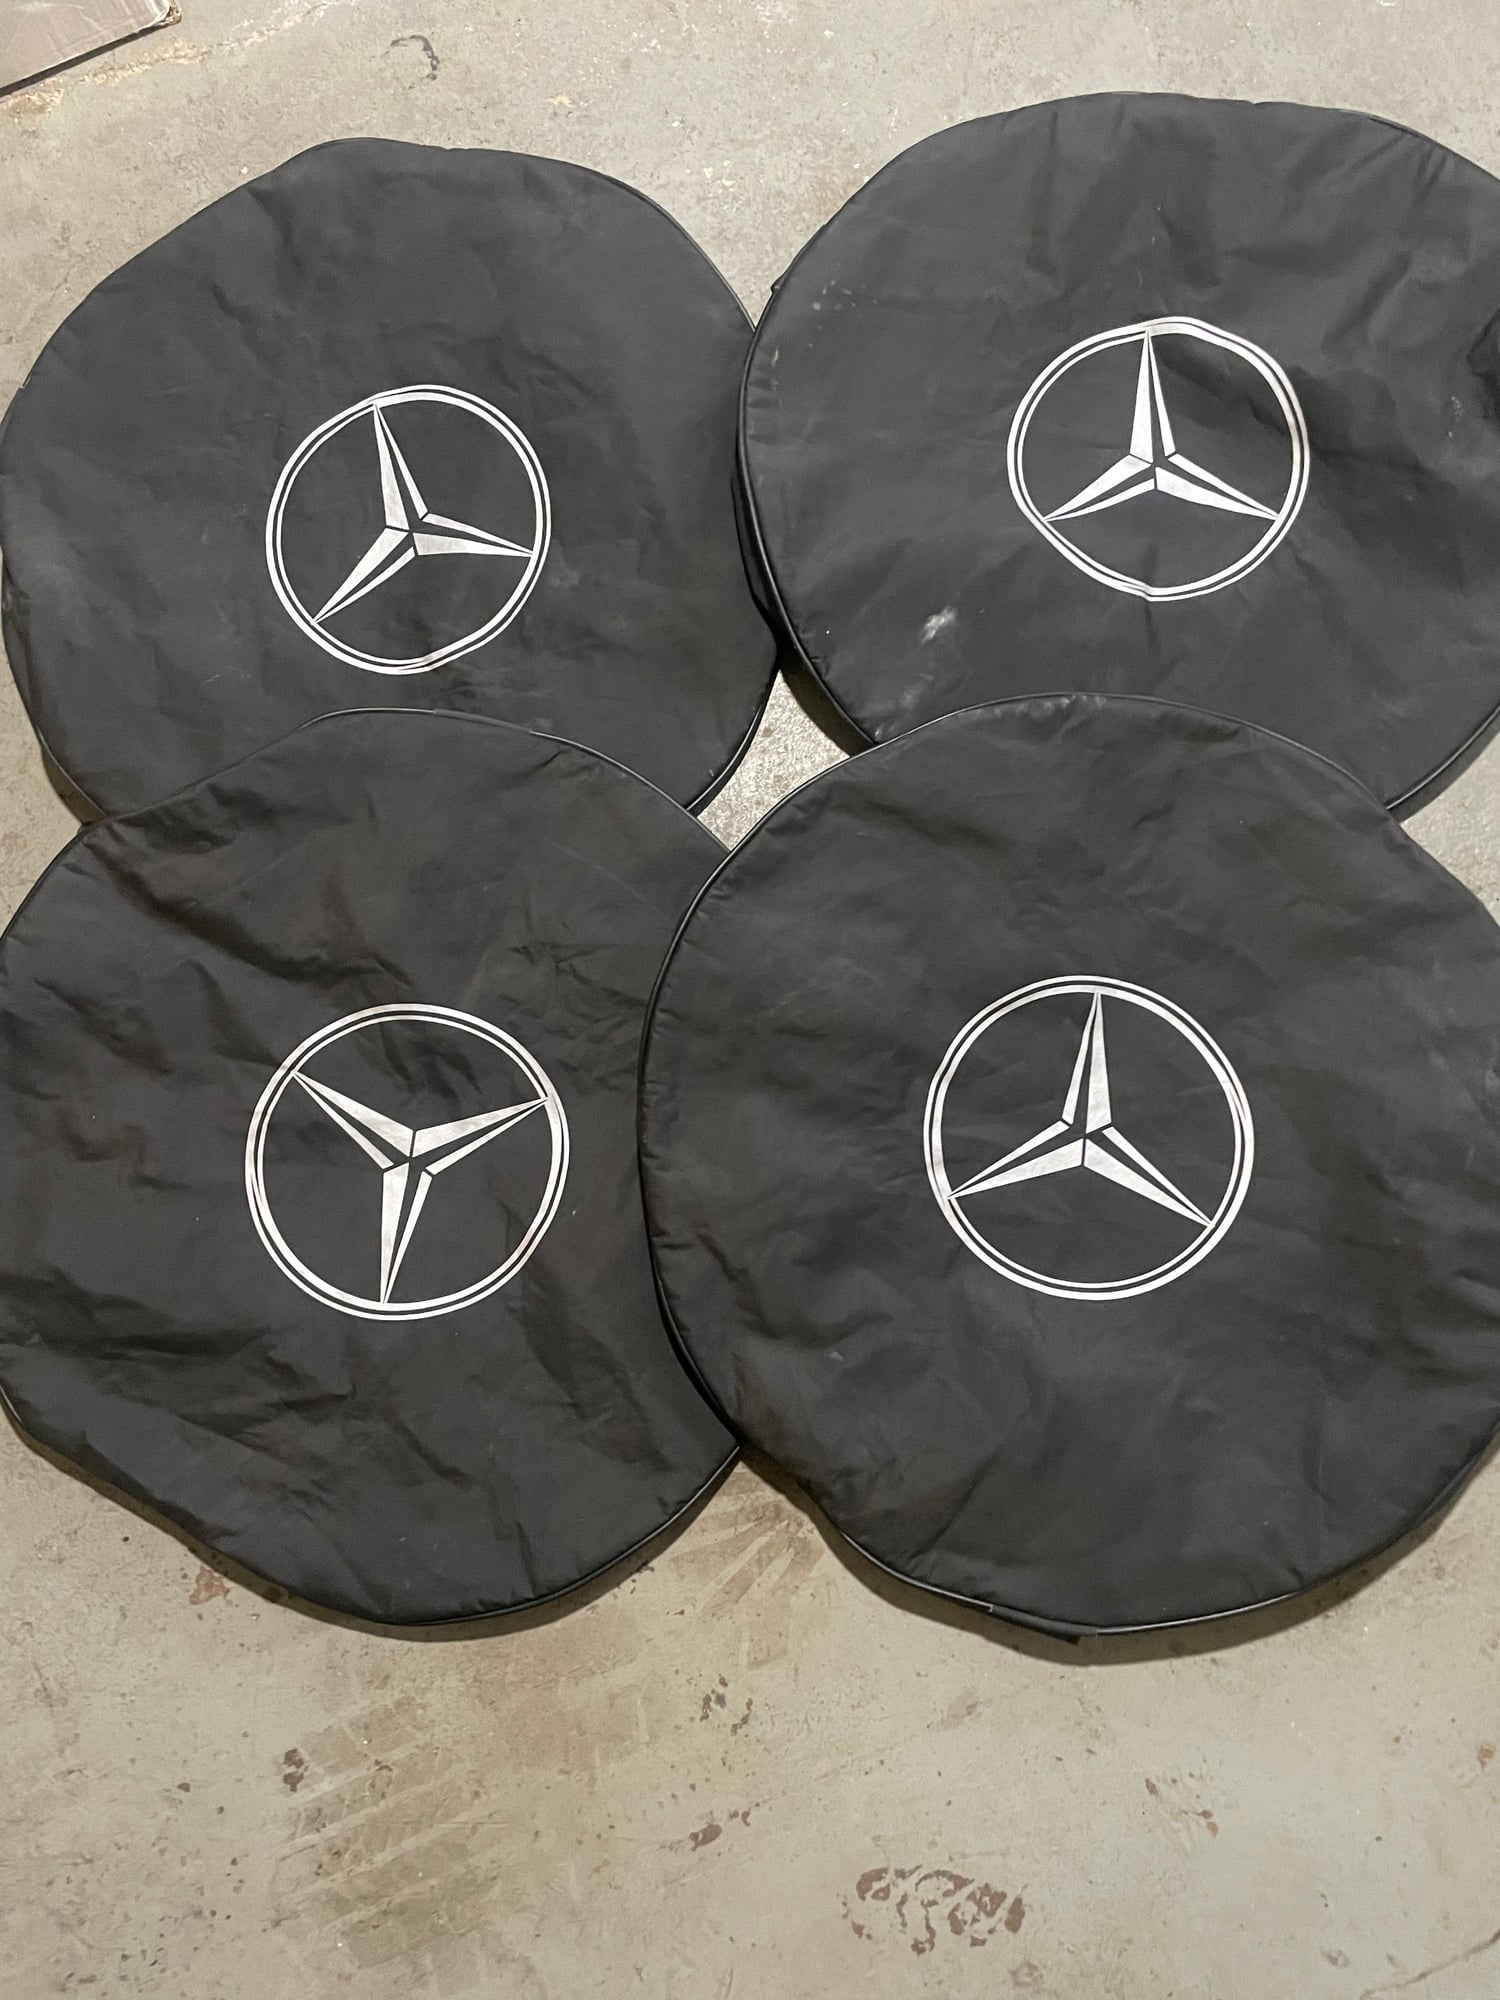 Accessories - Original Mercedes Wheel/Tire covers - Used - 2023 Mercedes-Benz All Models - Queens, NY 11378, United States